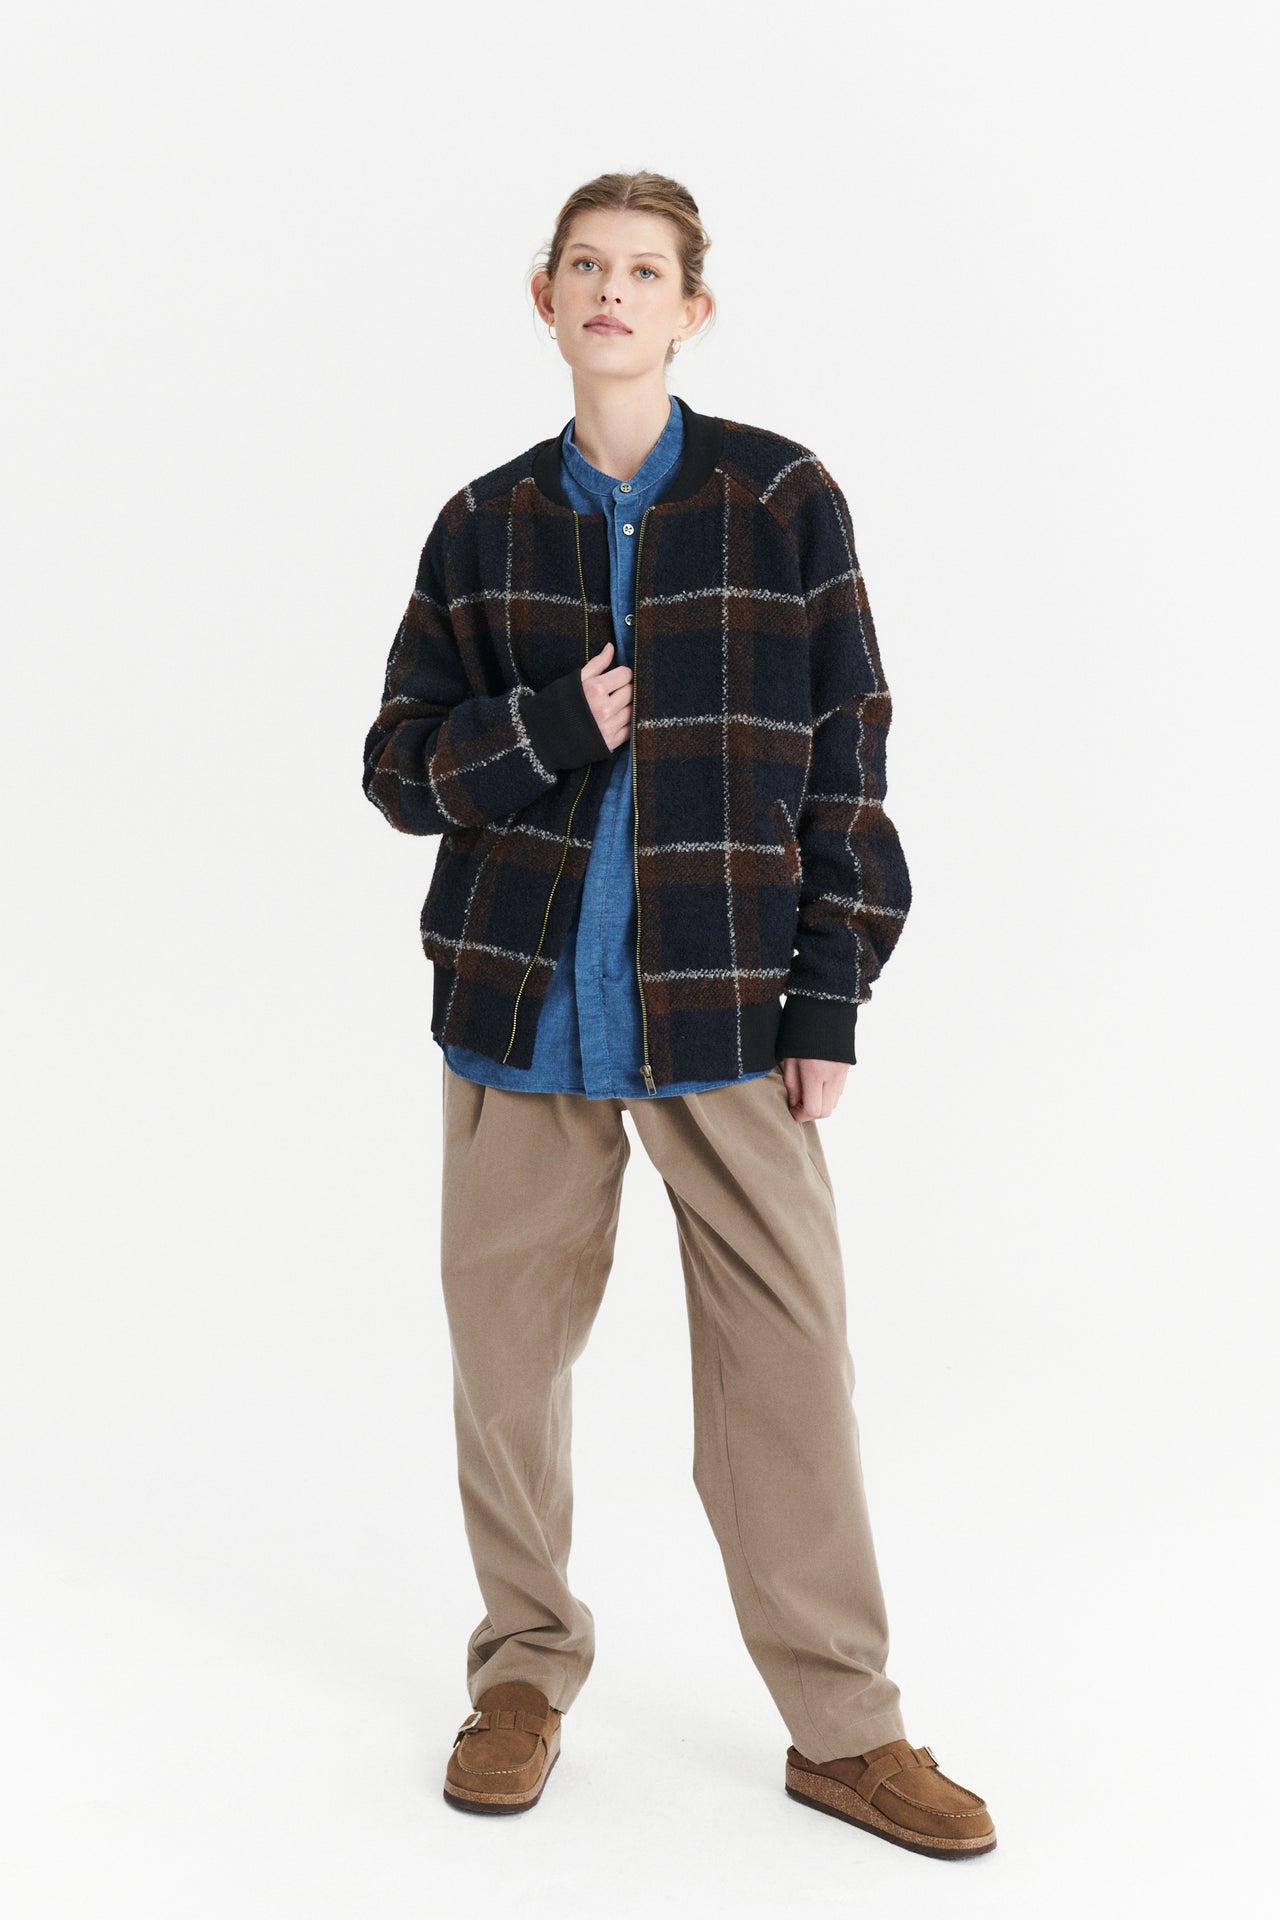 Unisex Bomber Jacket in a Brown and Navy Chequered Italian Virgin and Alpaca  Bouclé Wool